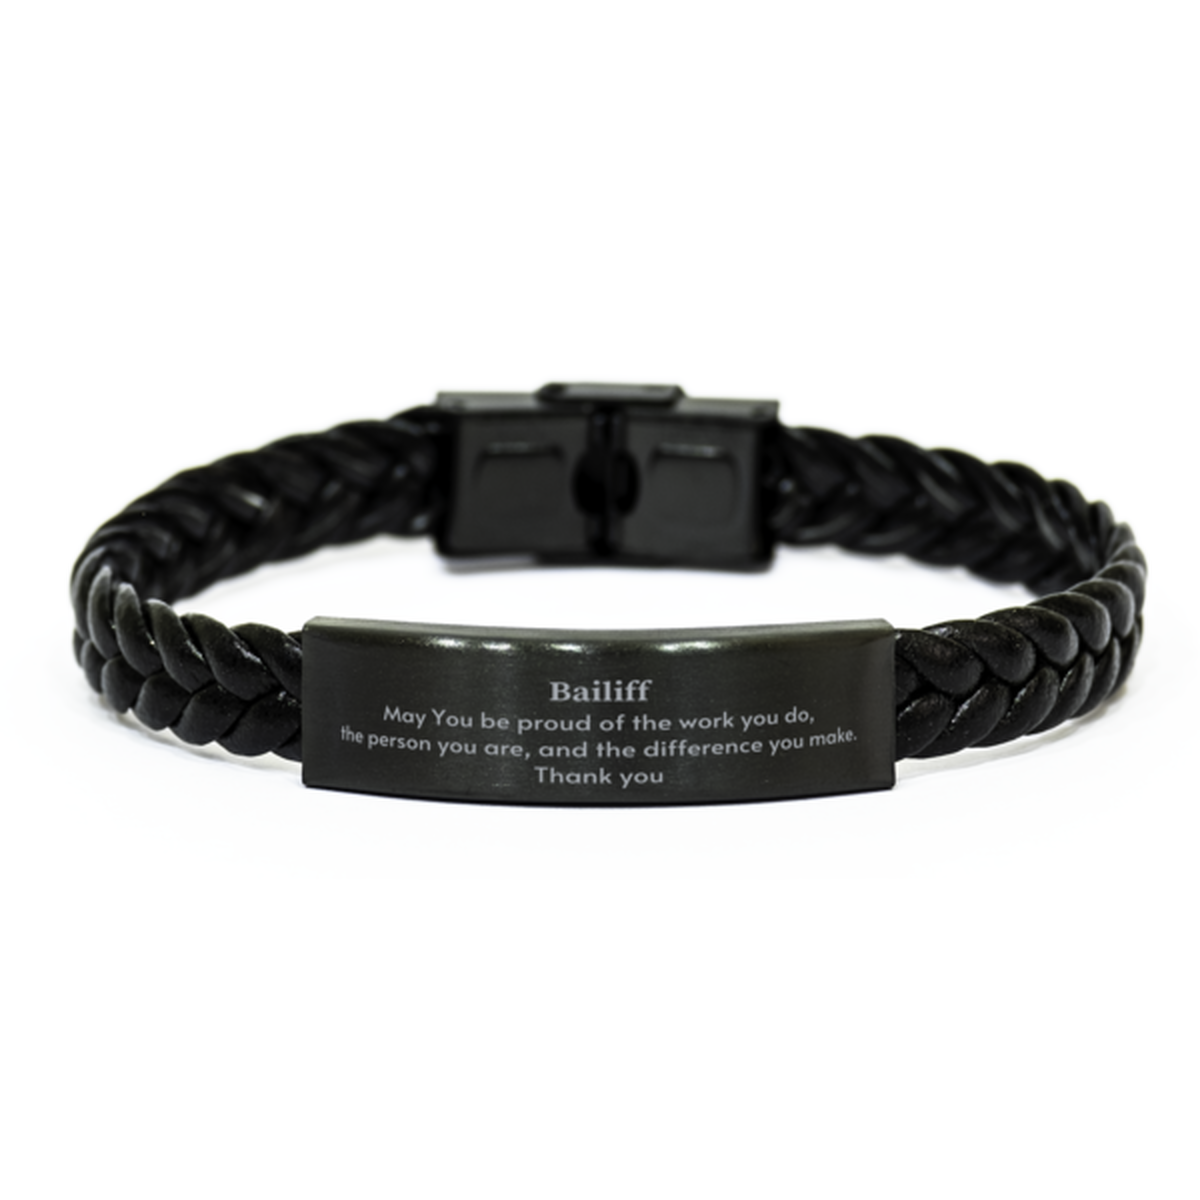 Heartwarming Braided Leather Bracelet Retirement Coworkers Gifts for Bailiff, Bailiff May You be proud of the work you do, the person you are Gifts for Boss Men Women Friends